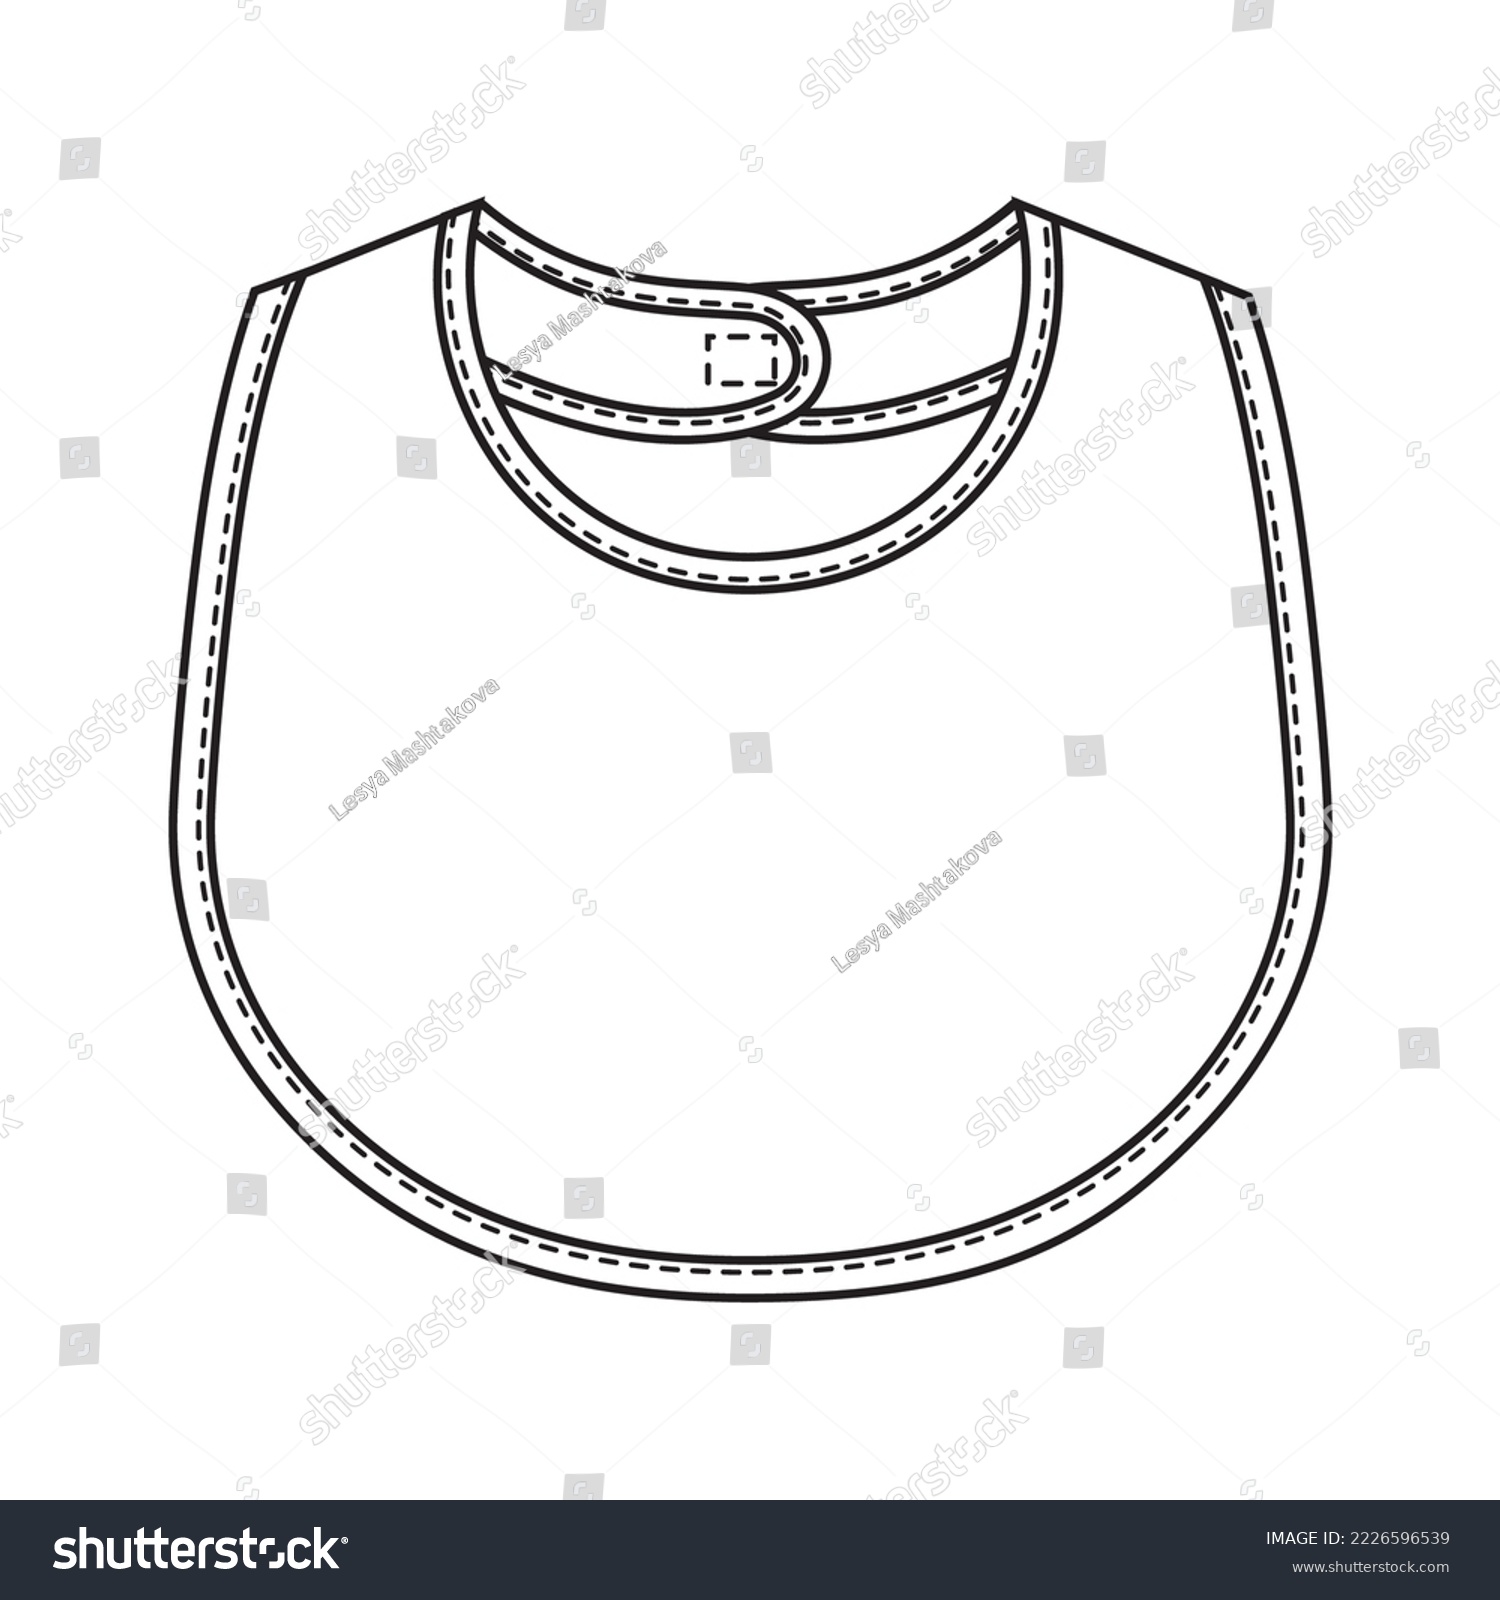 SVG of Baby bib template vector, black and white sketch svg